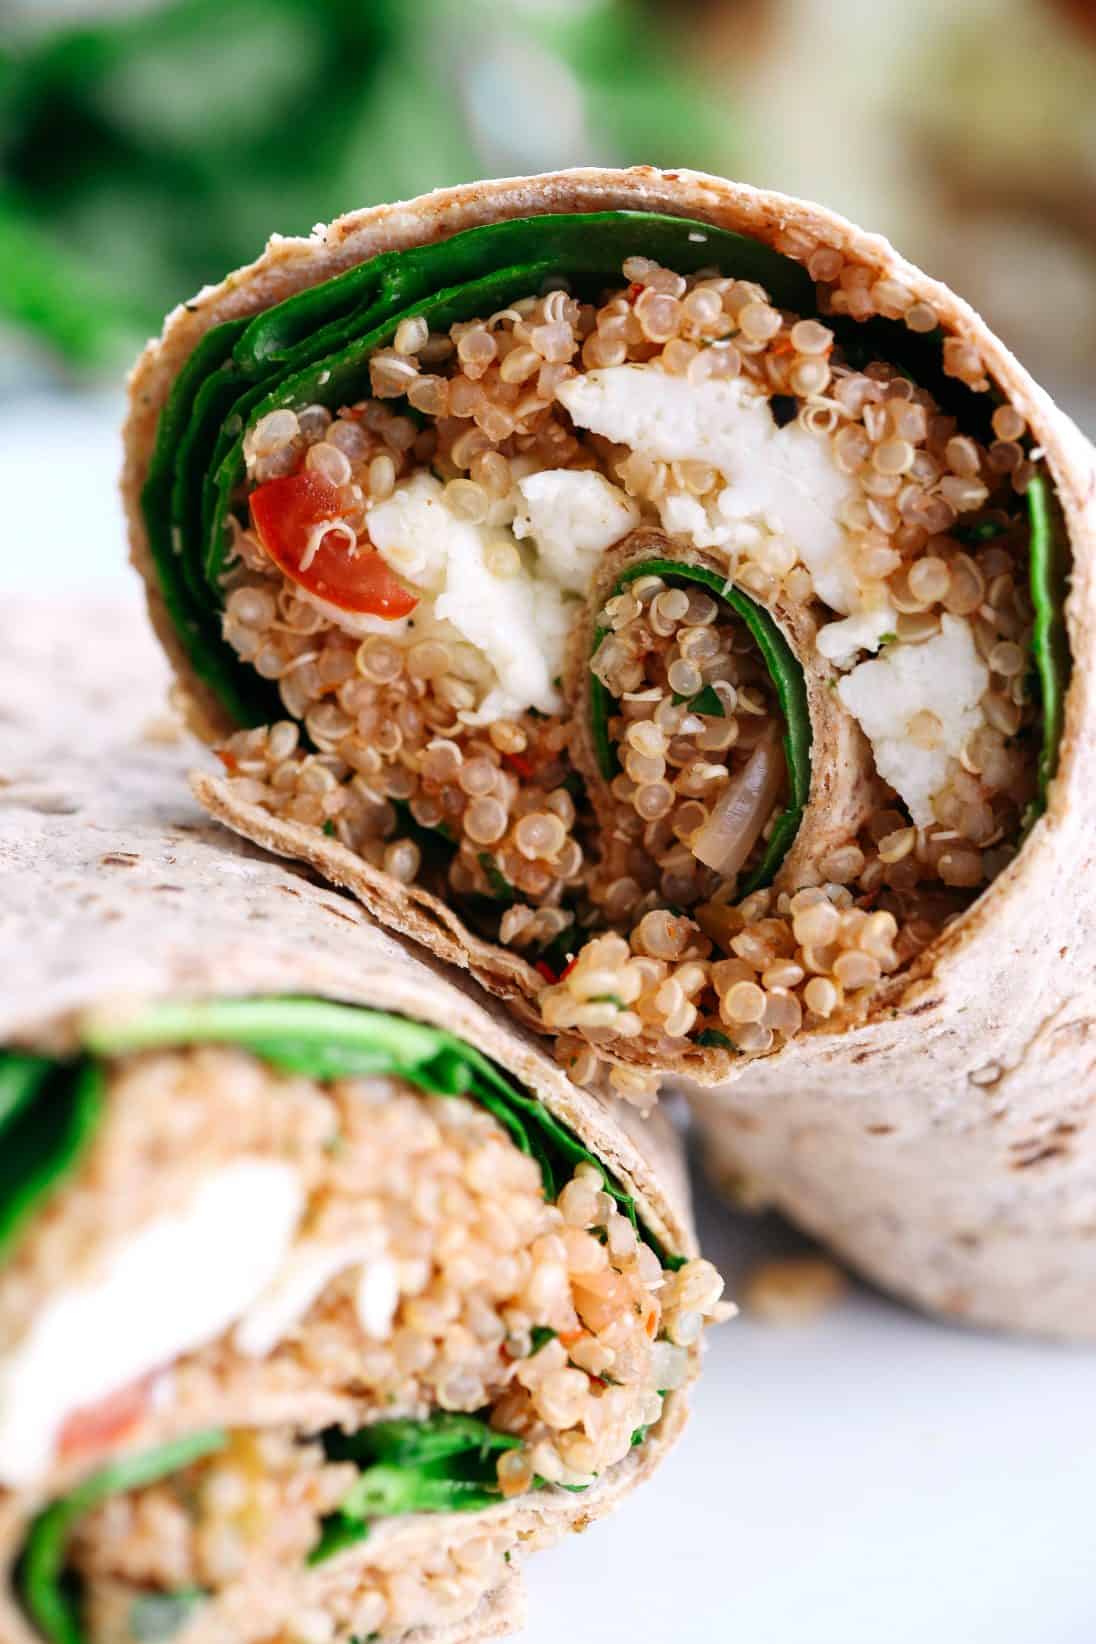 These Quinoa Egg White Wraps are super easy to make, are packed with tons of protein and taste super flavorful! They’re also perfect to grab on-the-go!